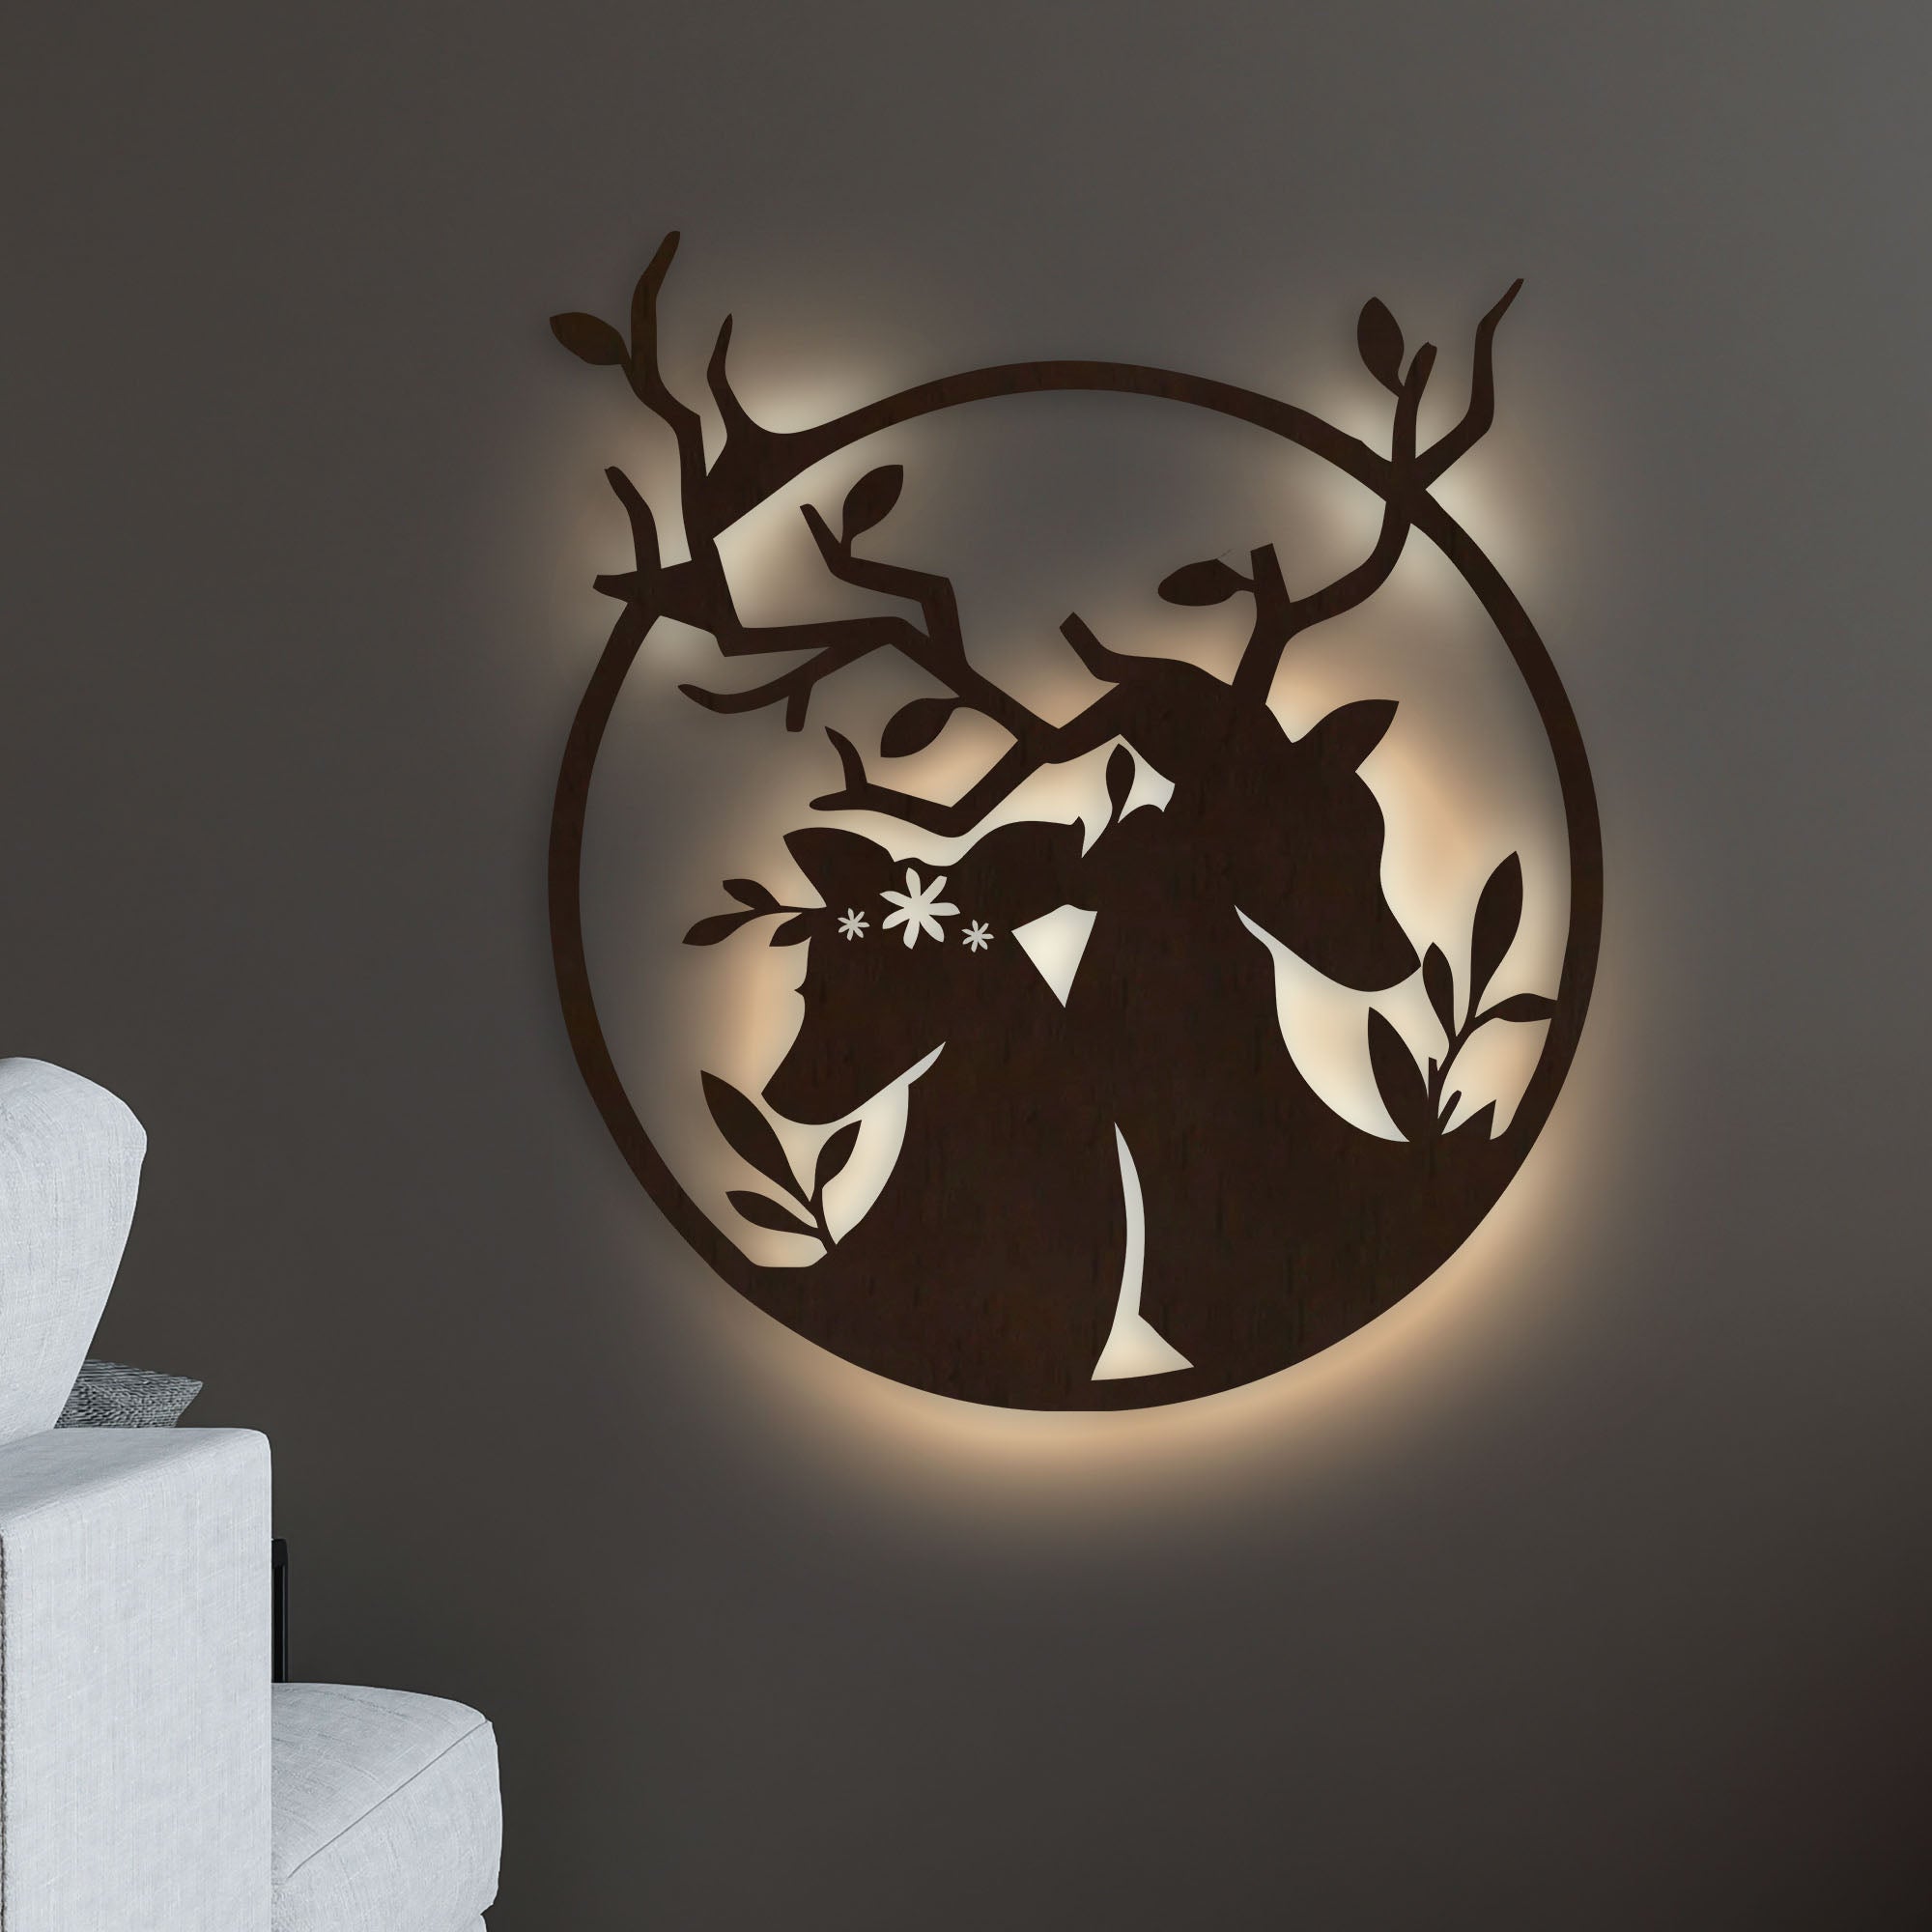 Loving Deer in Round Shaped Backlit Wooden Wall Decor with LED Night Light Walnut Finish